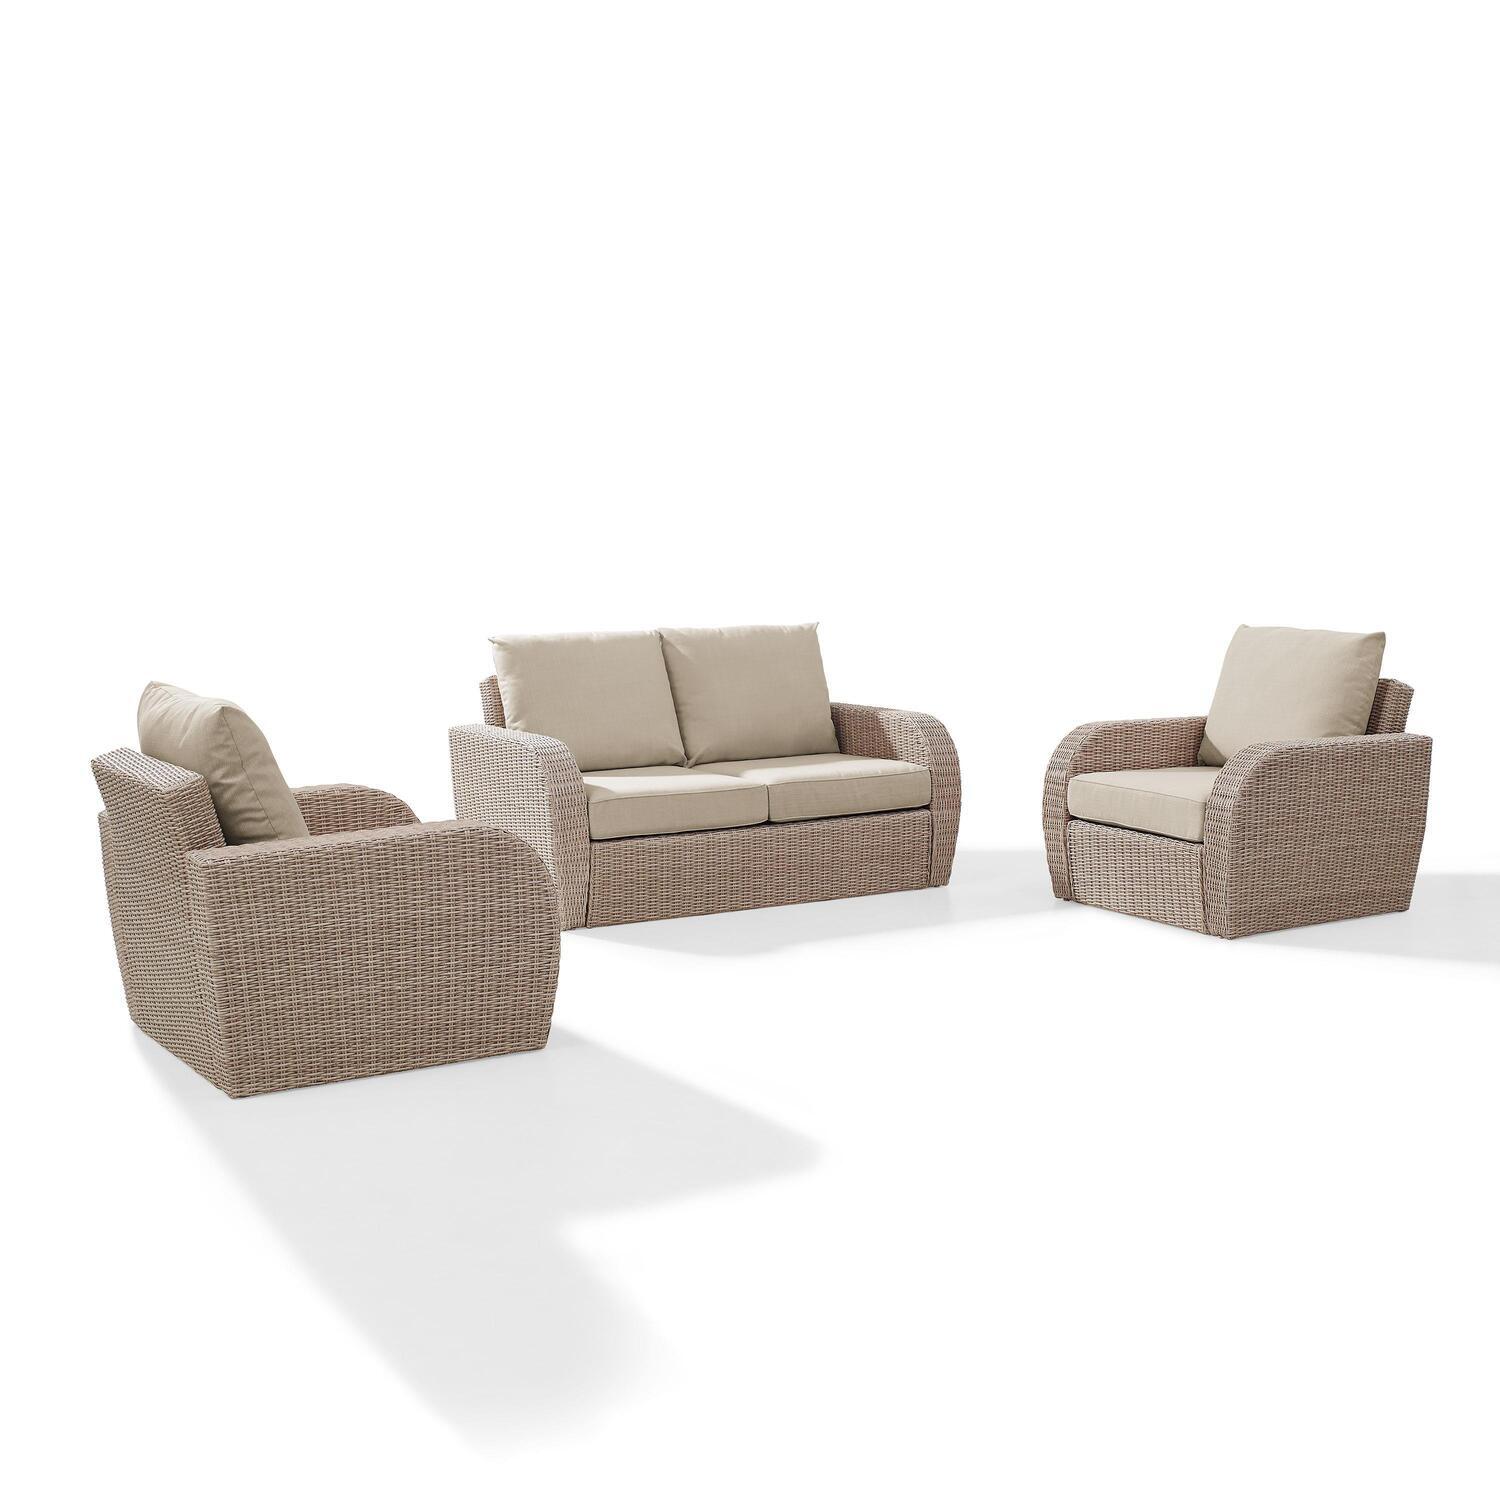 Crosley Furniture St Augustine 3 Pc Outdoor Wicker Seating Set With Oatmeal Cushion - Loveseat, Two Outdoor Chairs - image 1 of 5